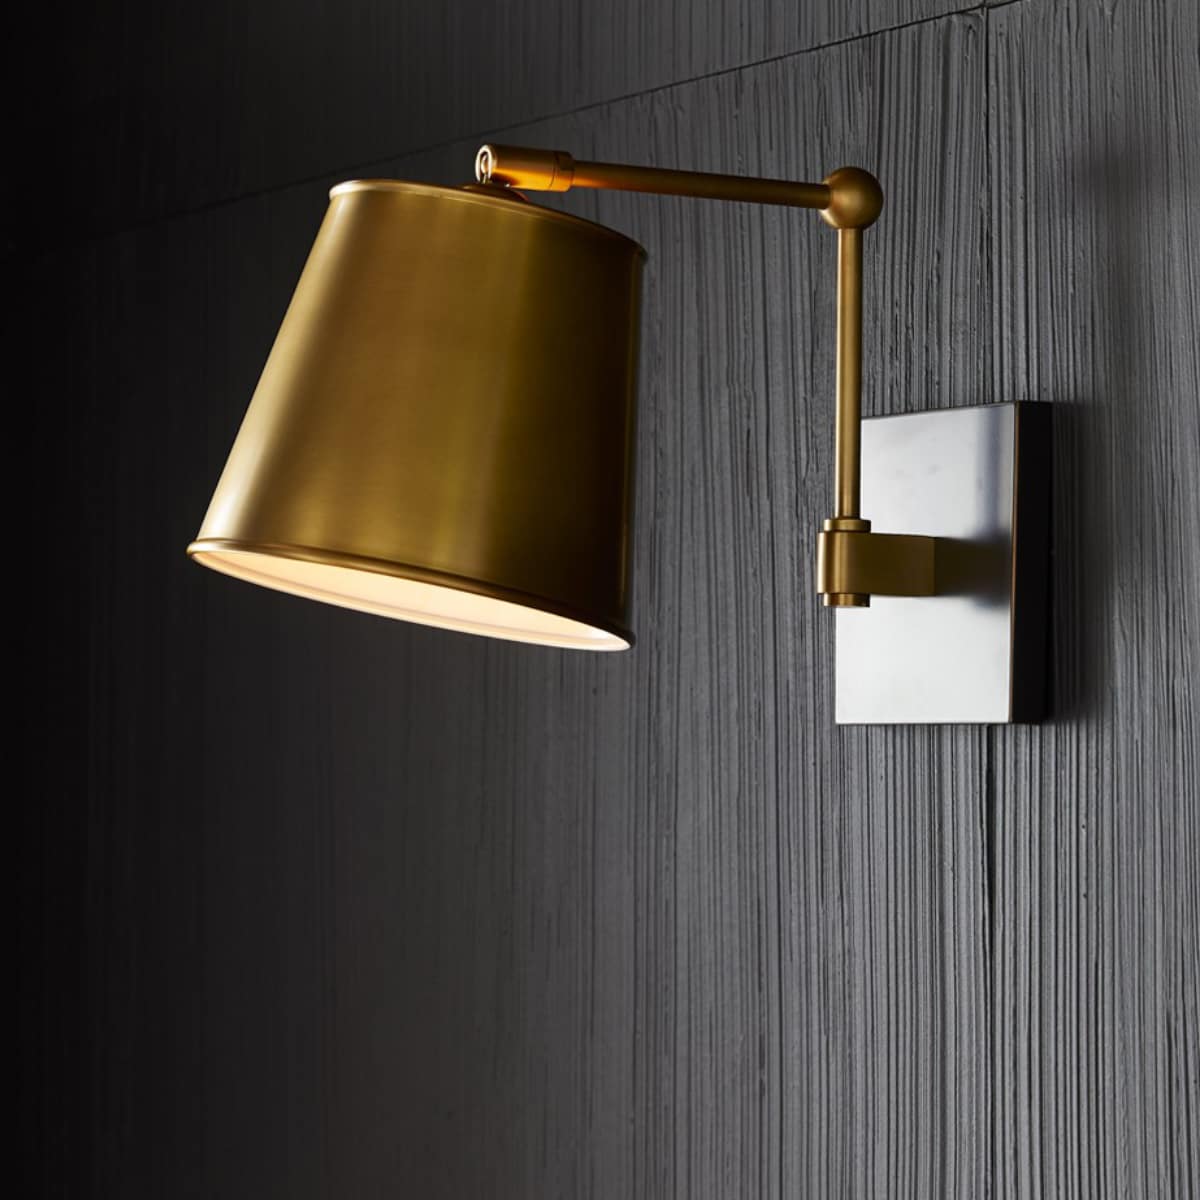 Lighting Guide - Wall Lights & Sconces